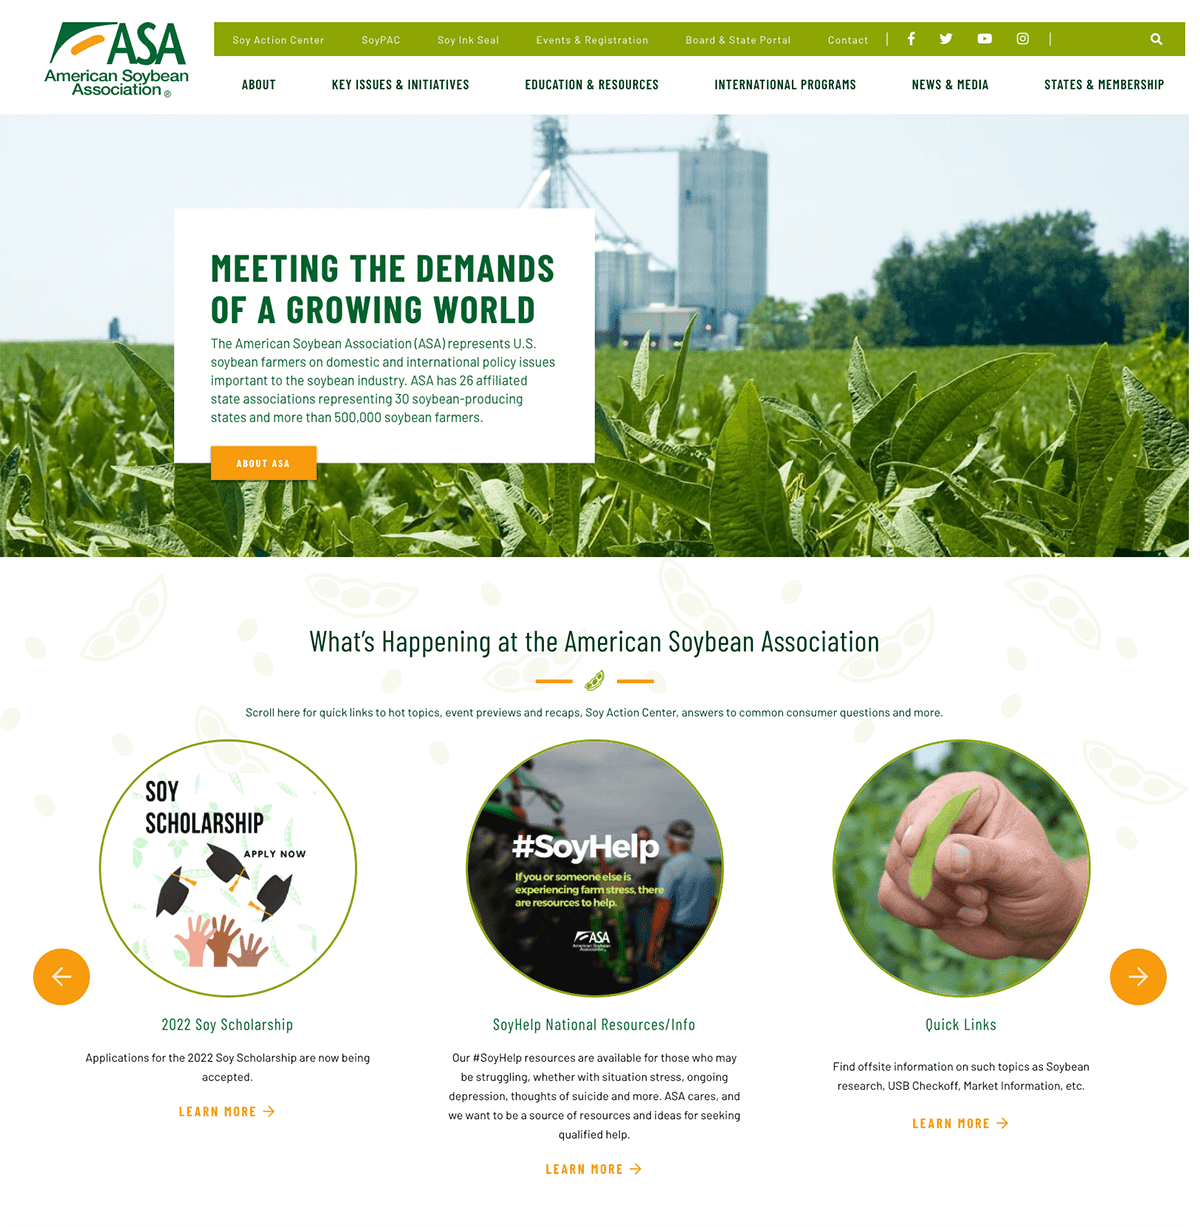 The nonprofit web design of the American Soybean Association